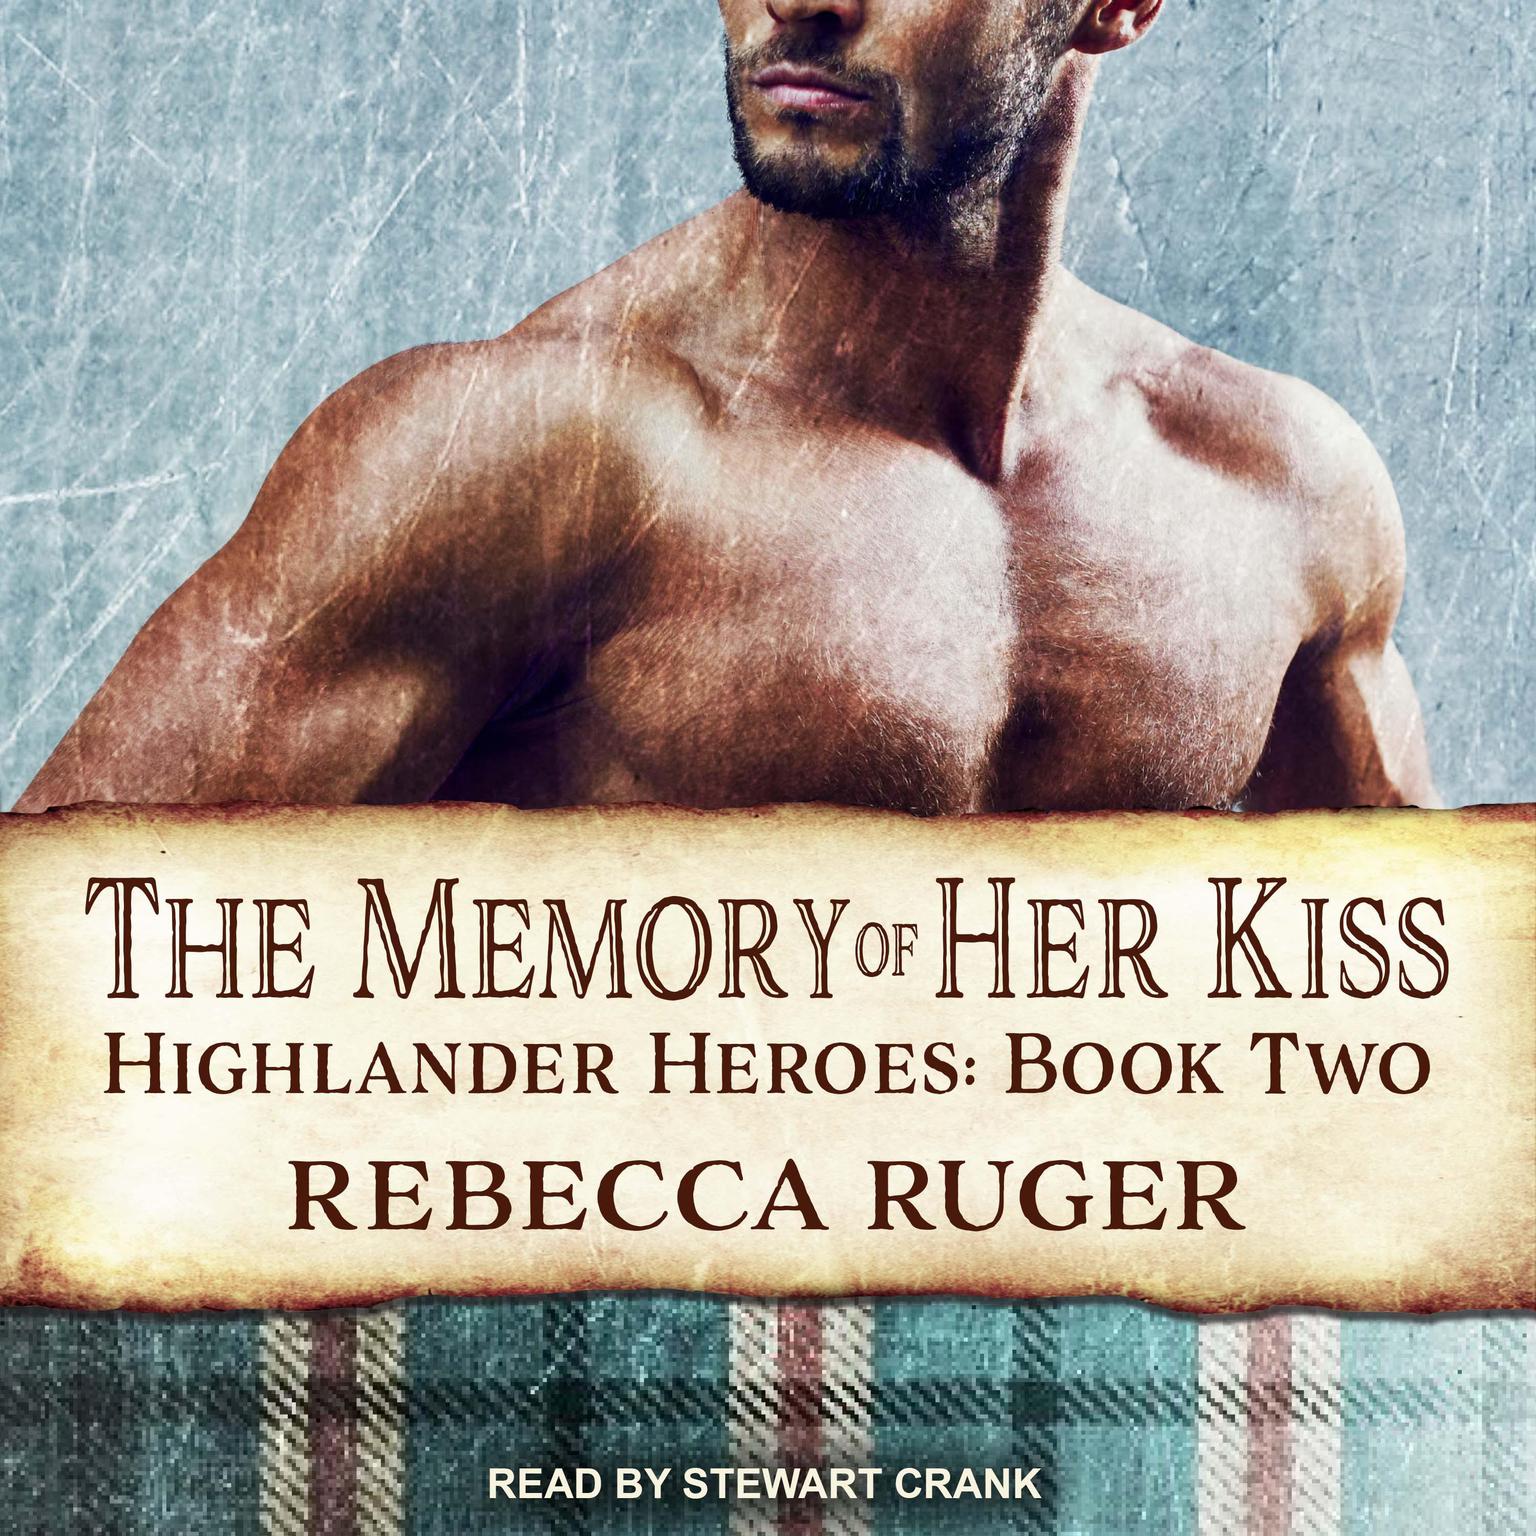 The Memory of Her Kiss Audiobook, by Rebecca Ruger